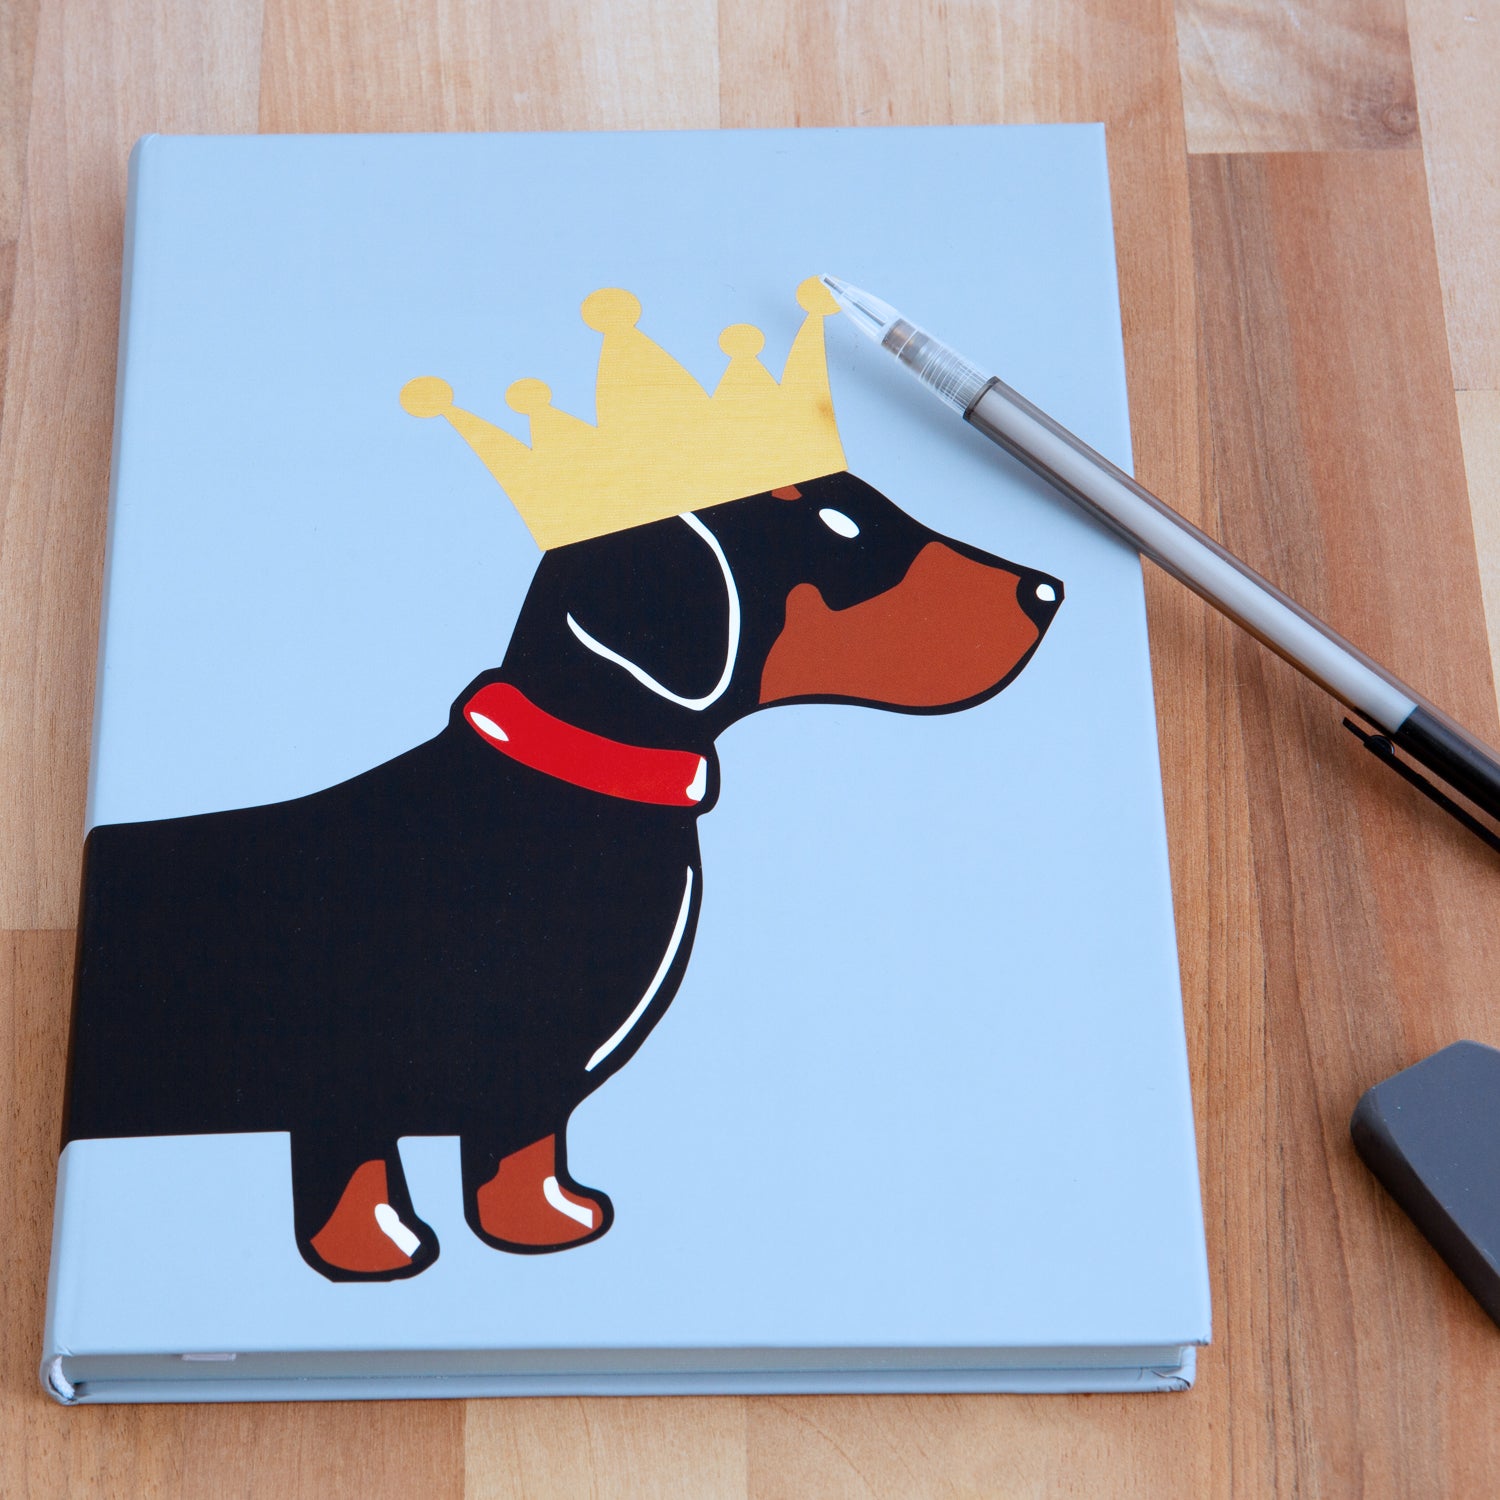 Dog Lover Gifts available at Dog Krazy Gifts - Florence The Dachshund A5 Notepad - part of the Sweet William range available from DogKrazyGifts.co.uk